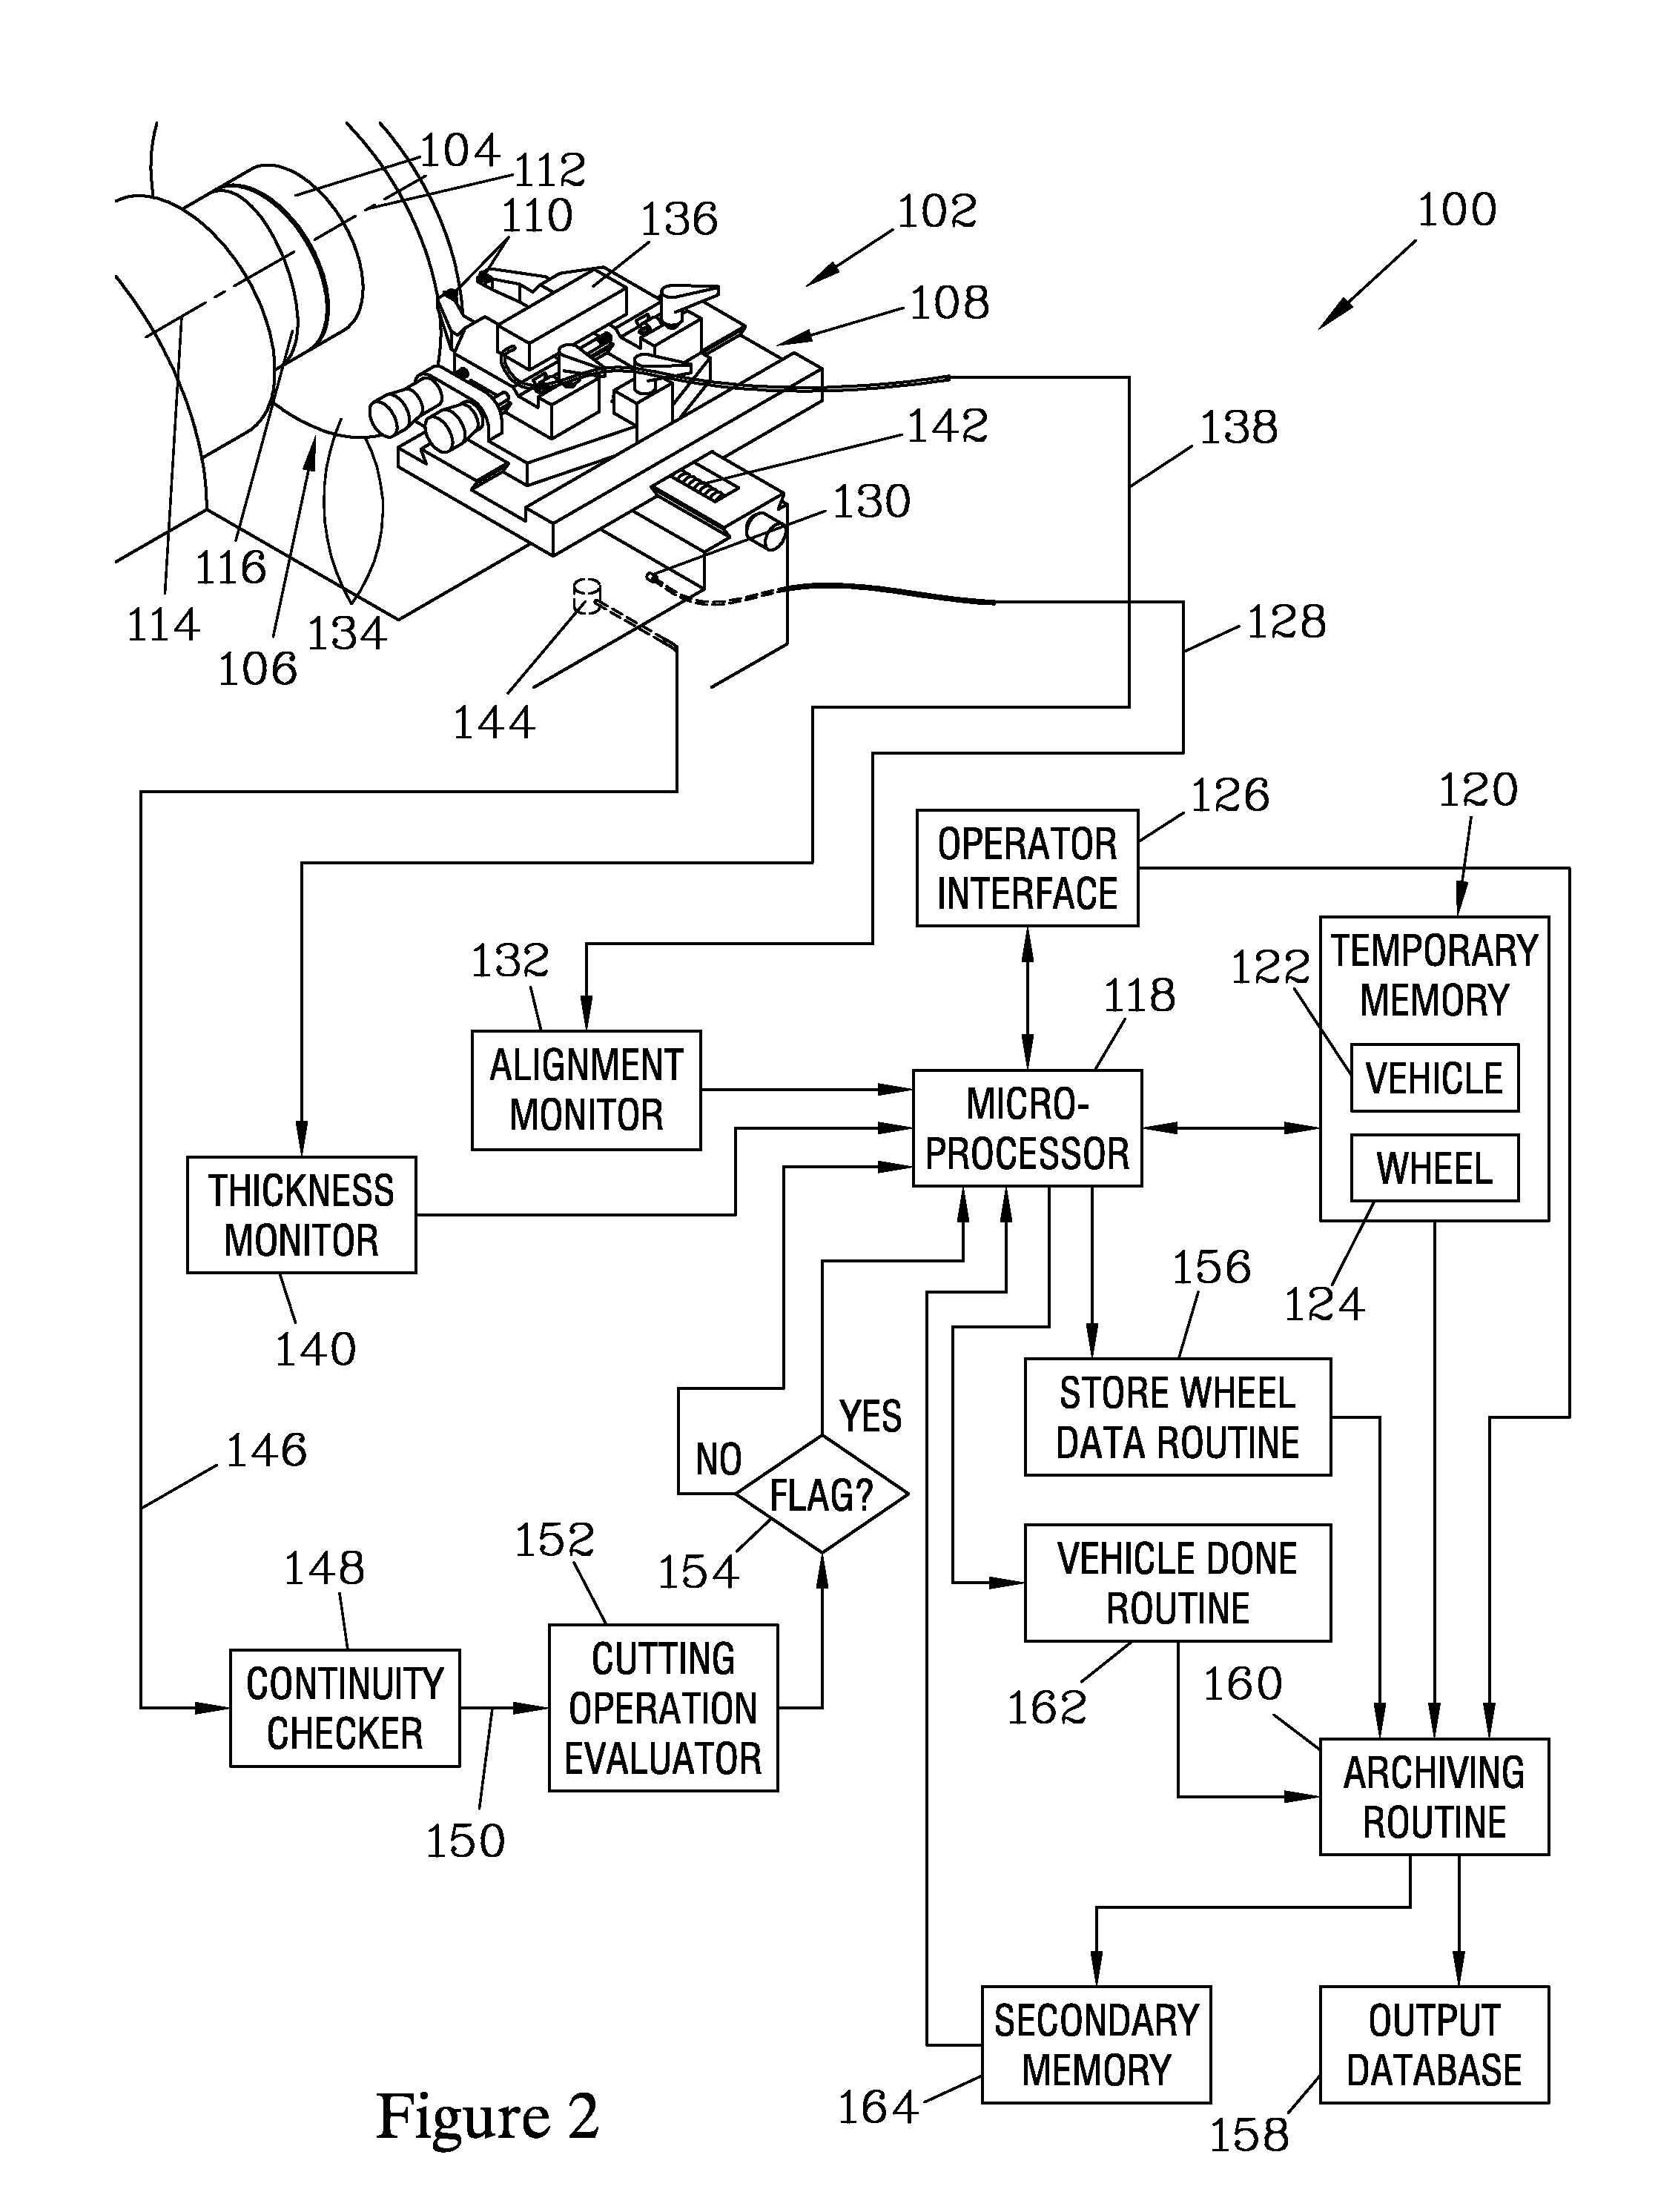 Reporting system for on-vehicle brake lathe